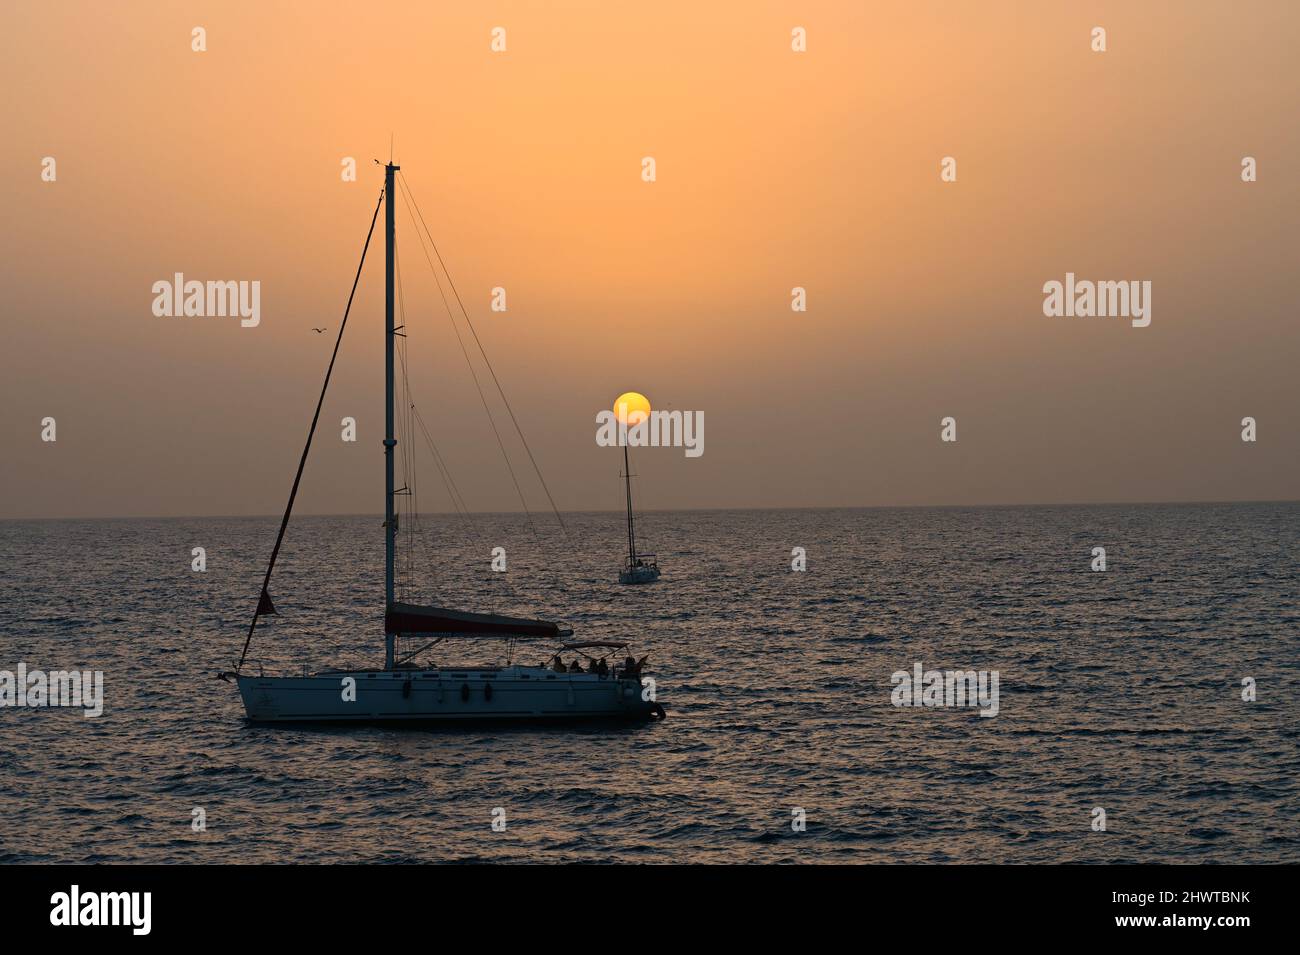 A tranquil distant sunset on a warm February Day over the Atlantic Ocean at dusk with two sail boat crossing the horizon Stock Photo